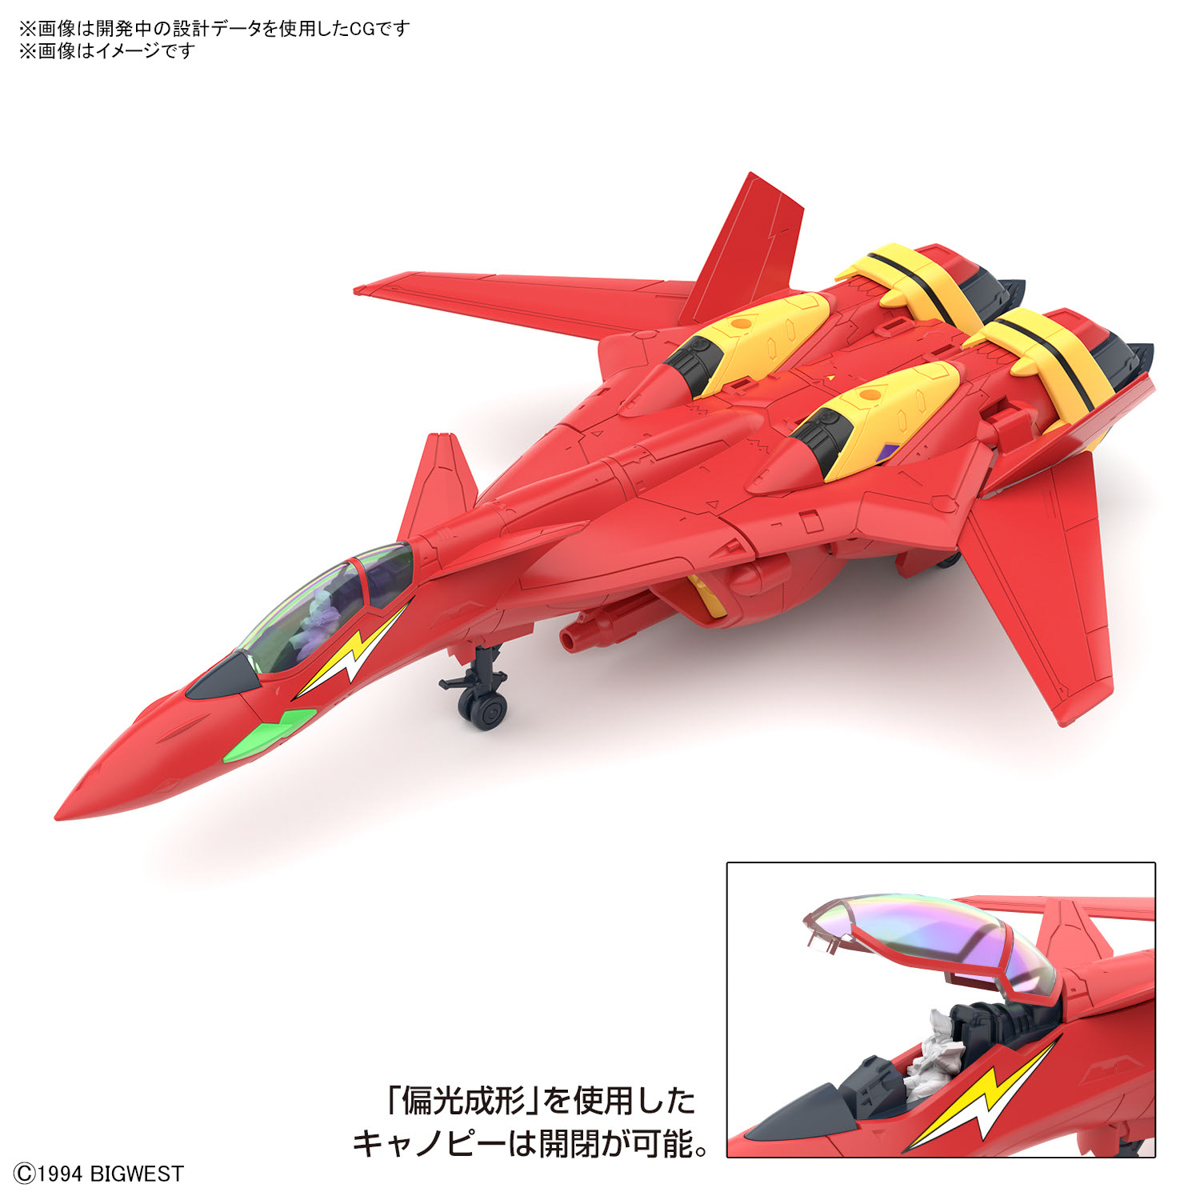 MACROSS 7:  HG 1/100 VF-19 EXCALIBUR CUSTOM (FIRE VALKYRIE) WITH SOUND BOOSTER - 05